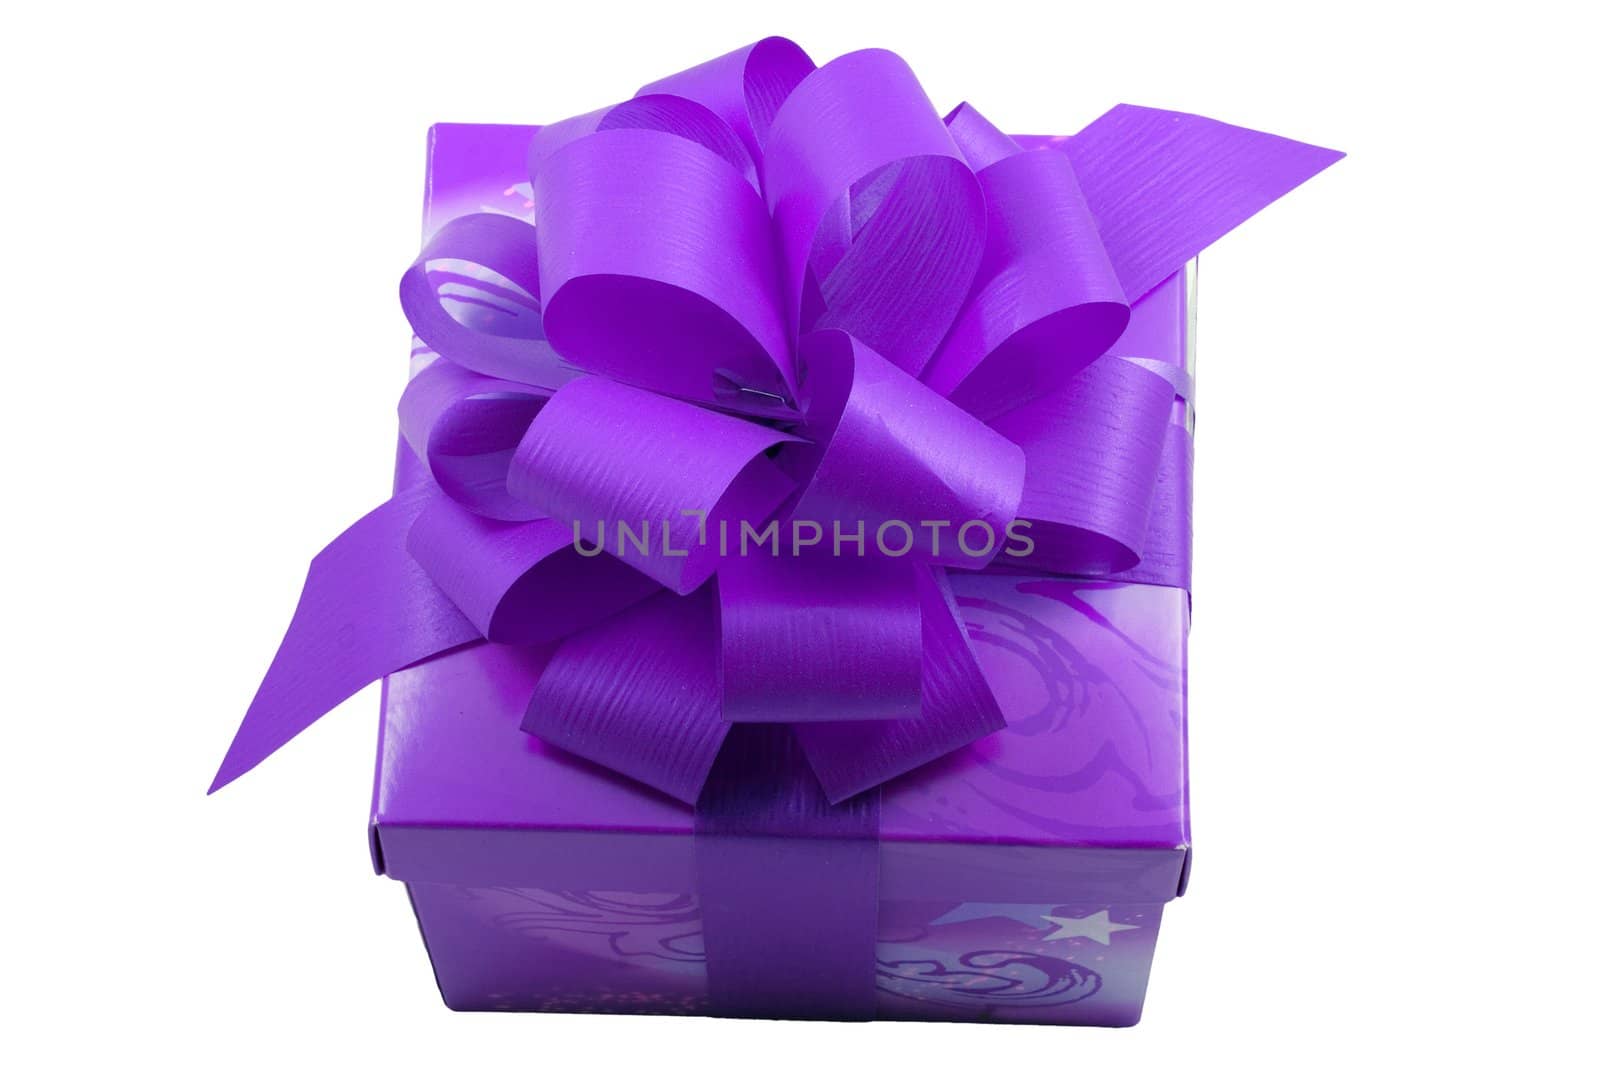 a violet present with a violet ribbon isolated on the white background